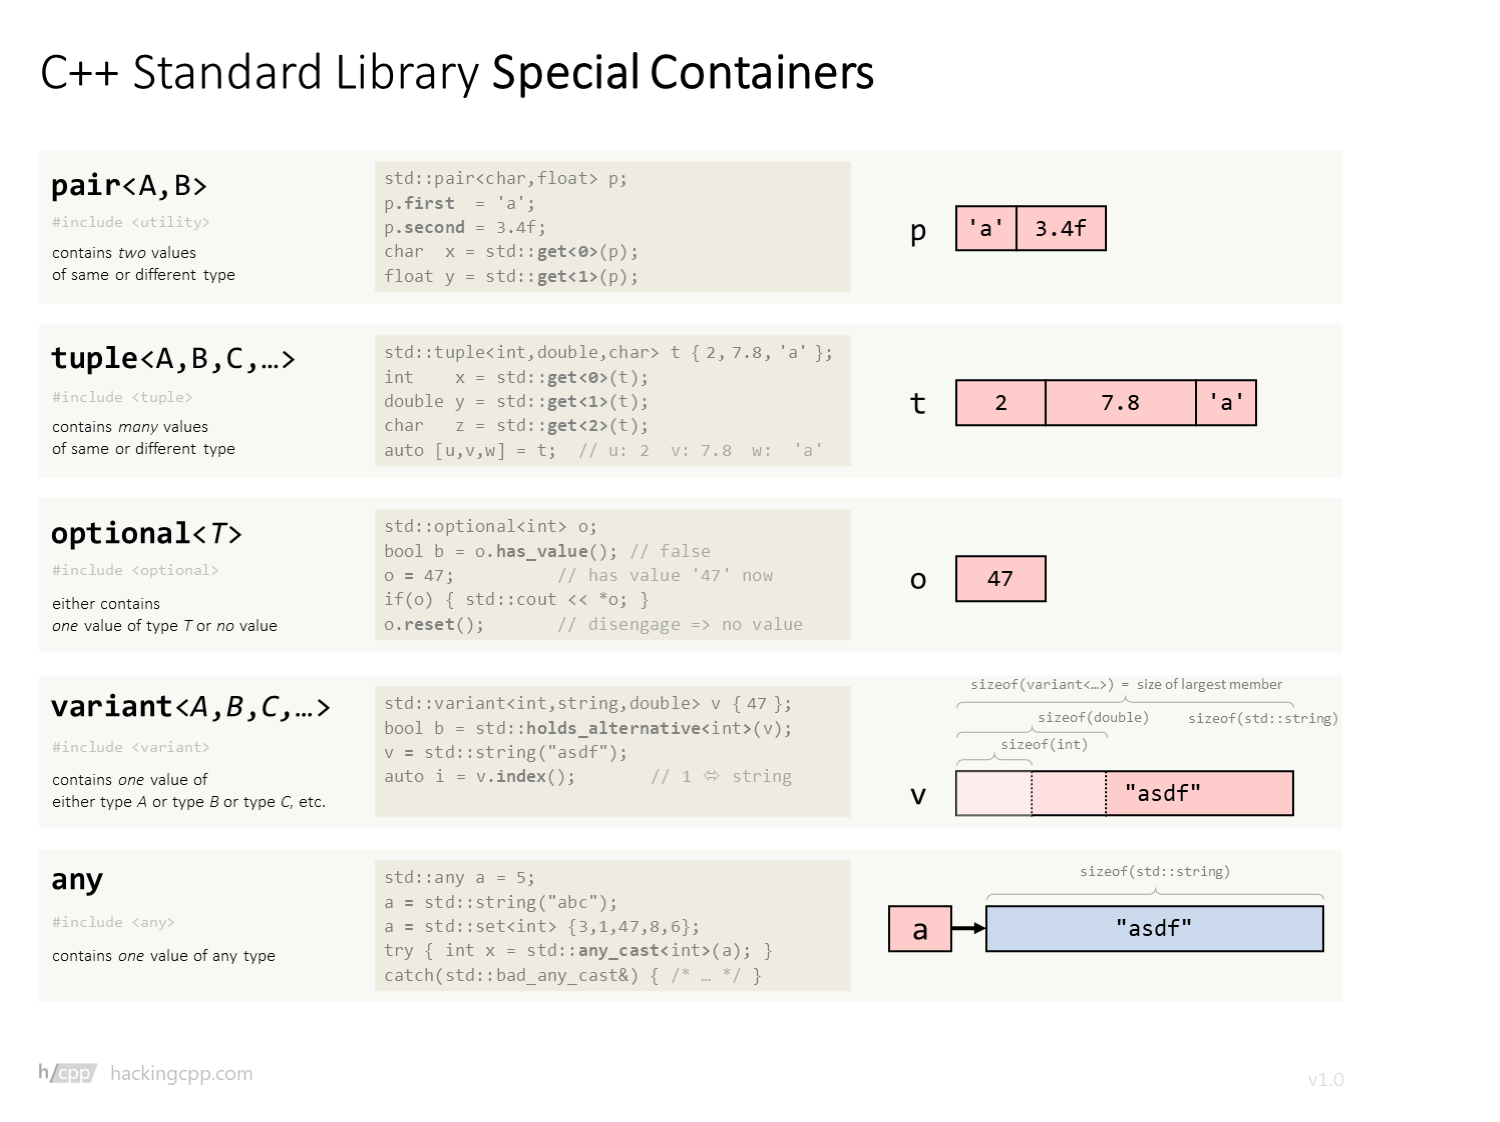 special_containers